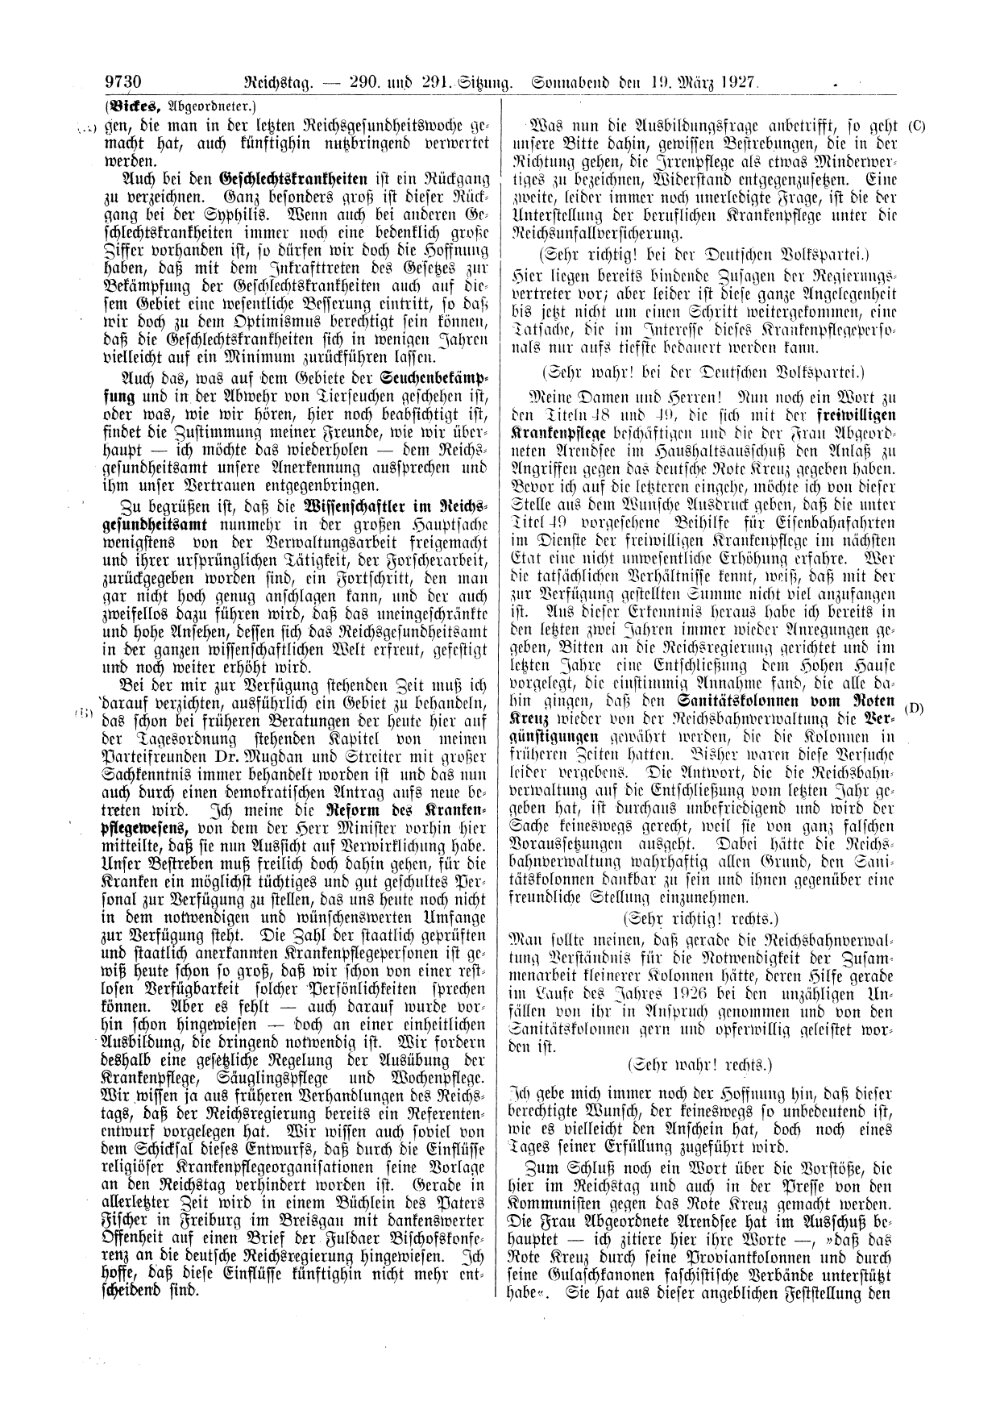 Scan of page 9730